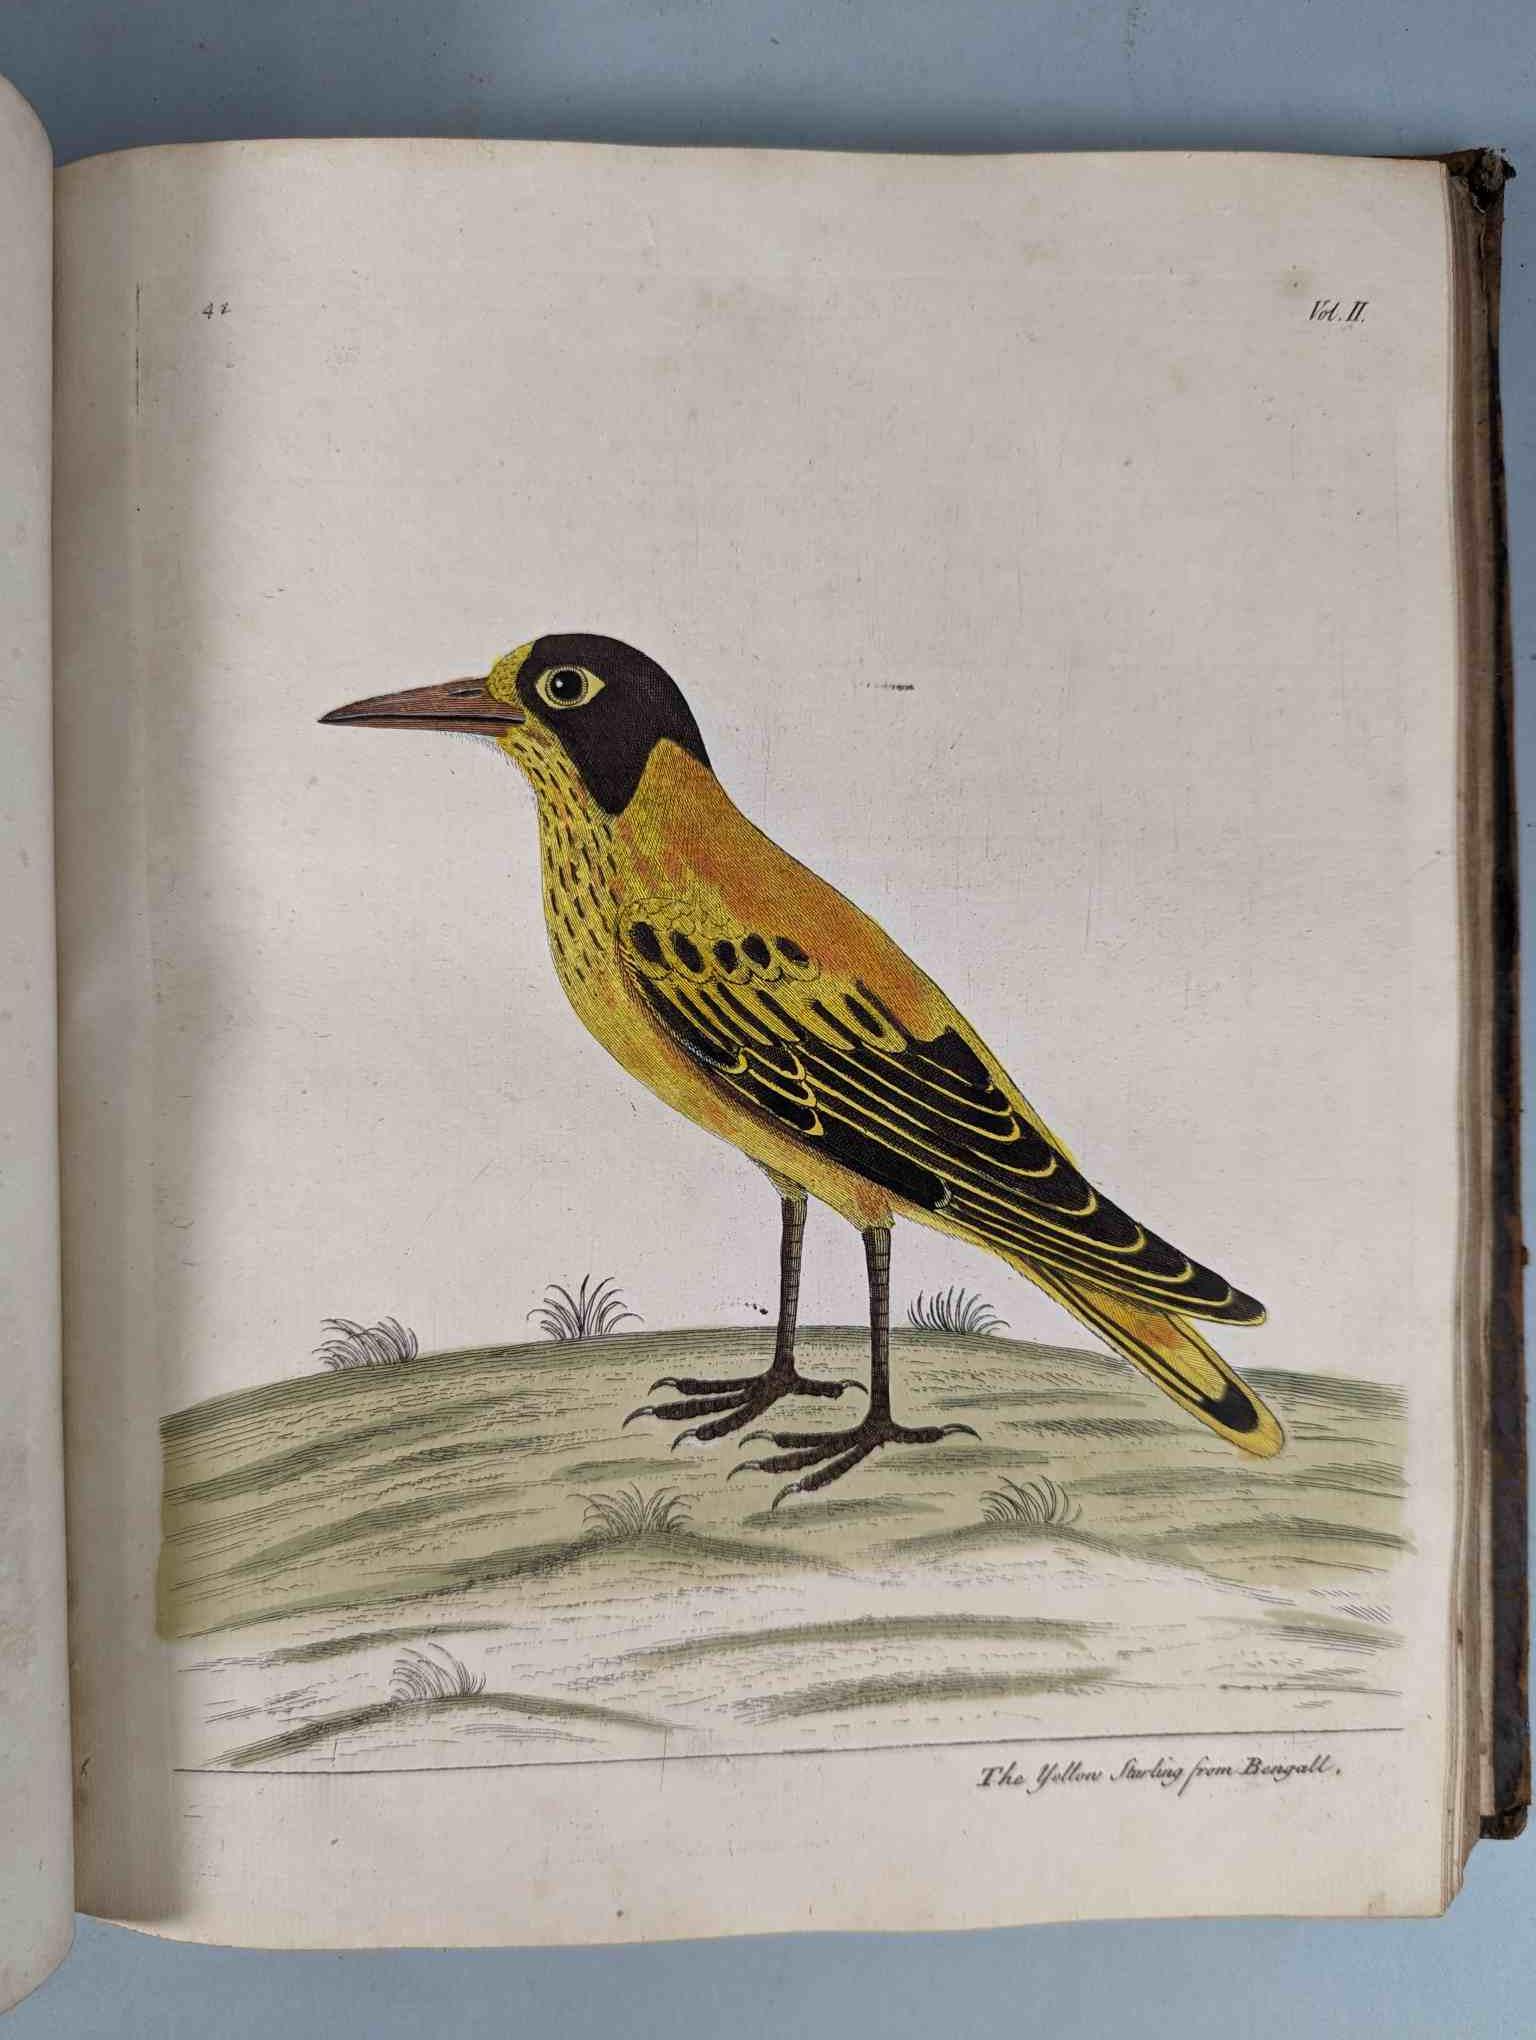 ALBIN, Eleazar. A Natural History of Birds, to which are added, Notes and Observations by W. - Image 145 of 208